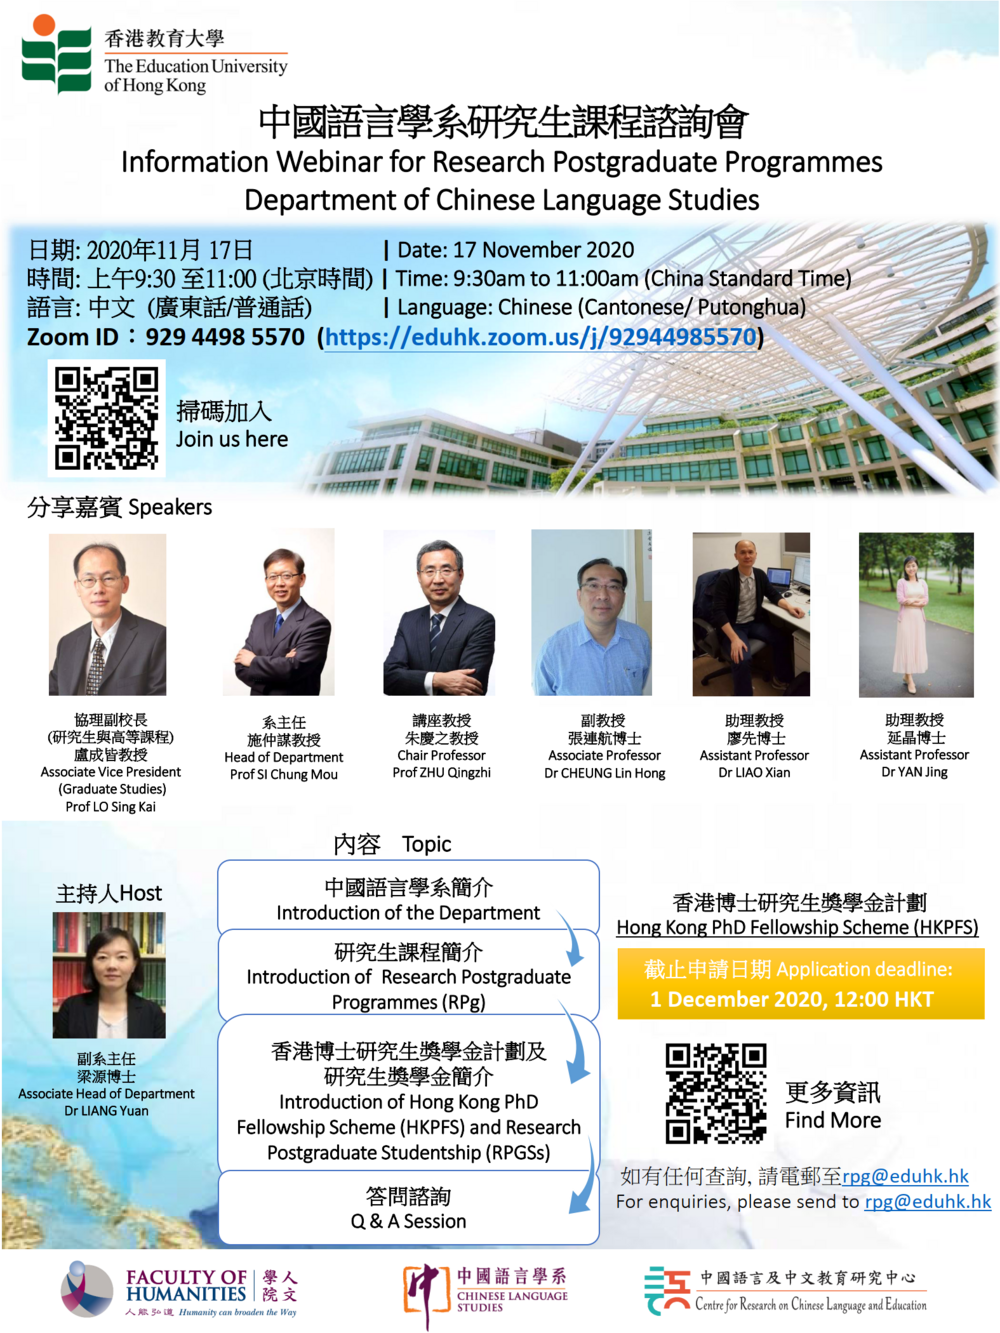 Information Webinar for Research Postgraduate Programmes organized by (Department of Chinese Language Studies)